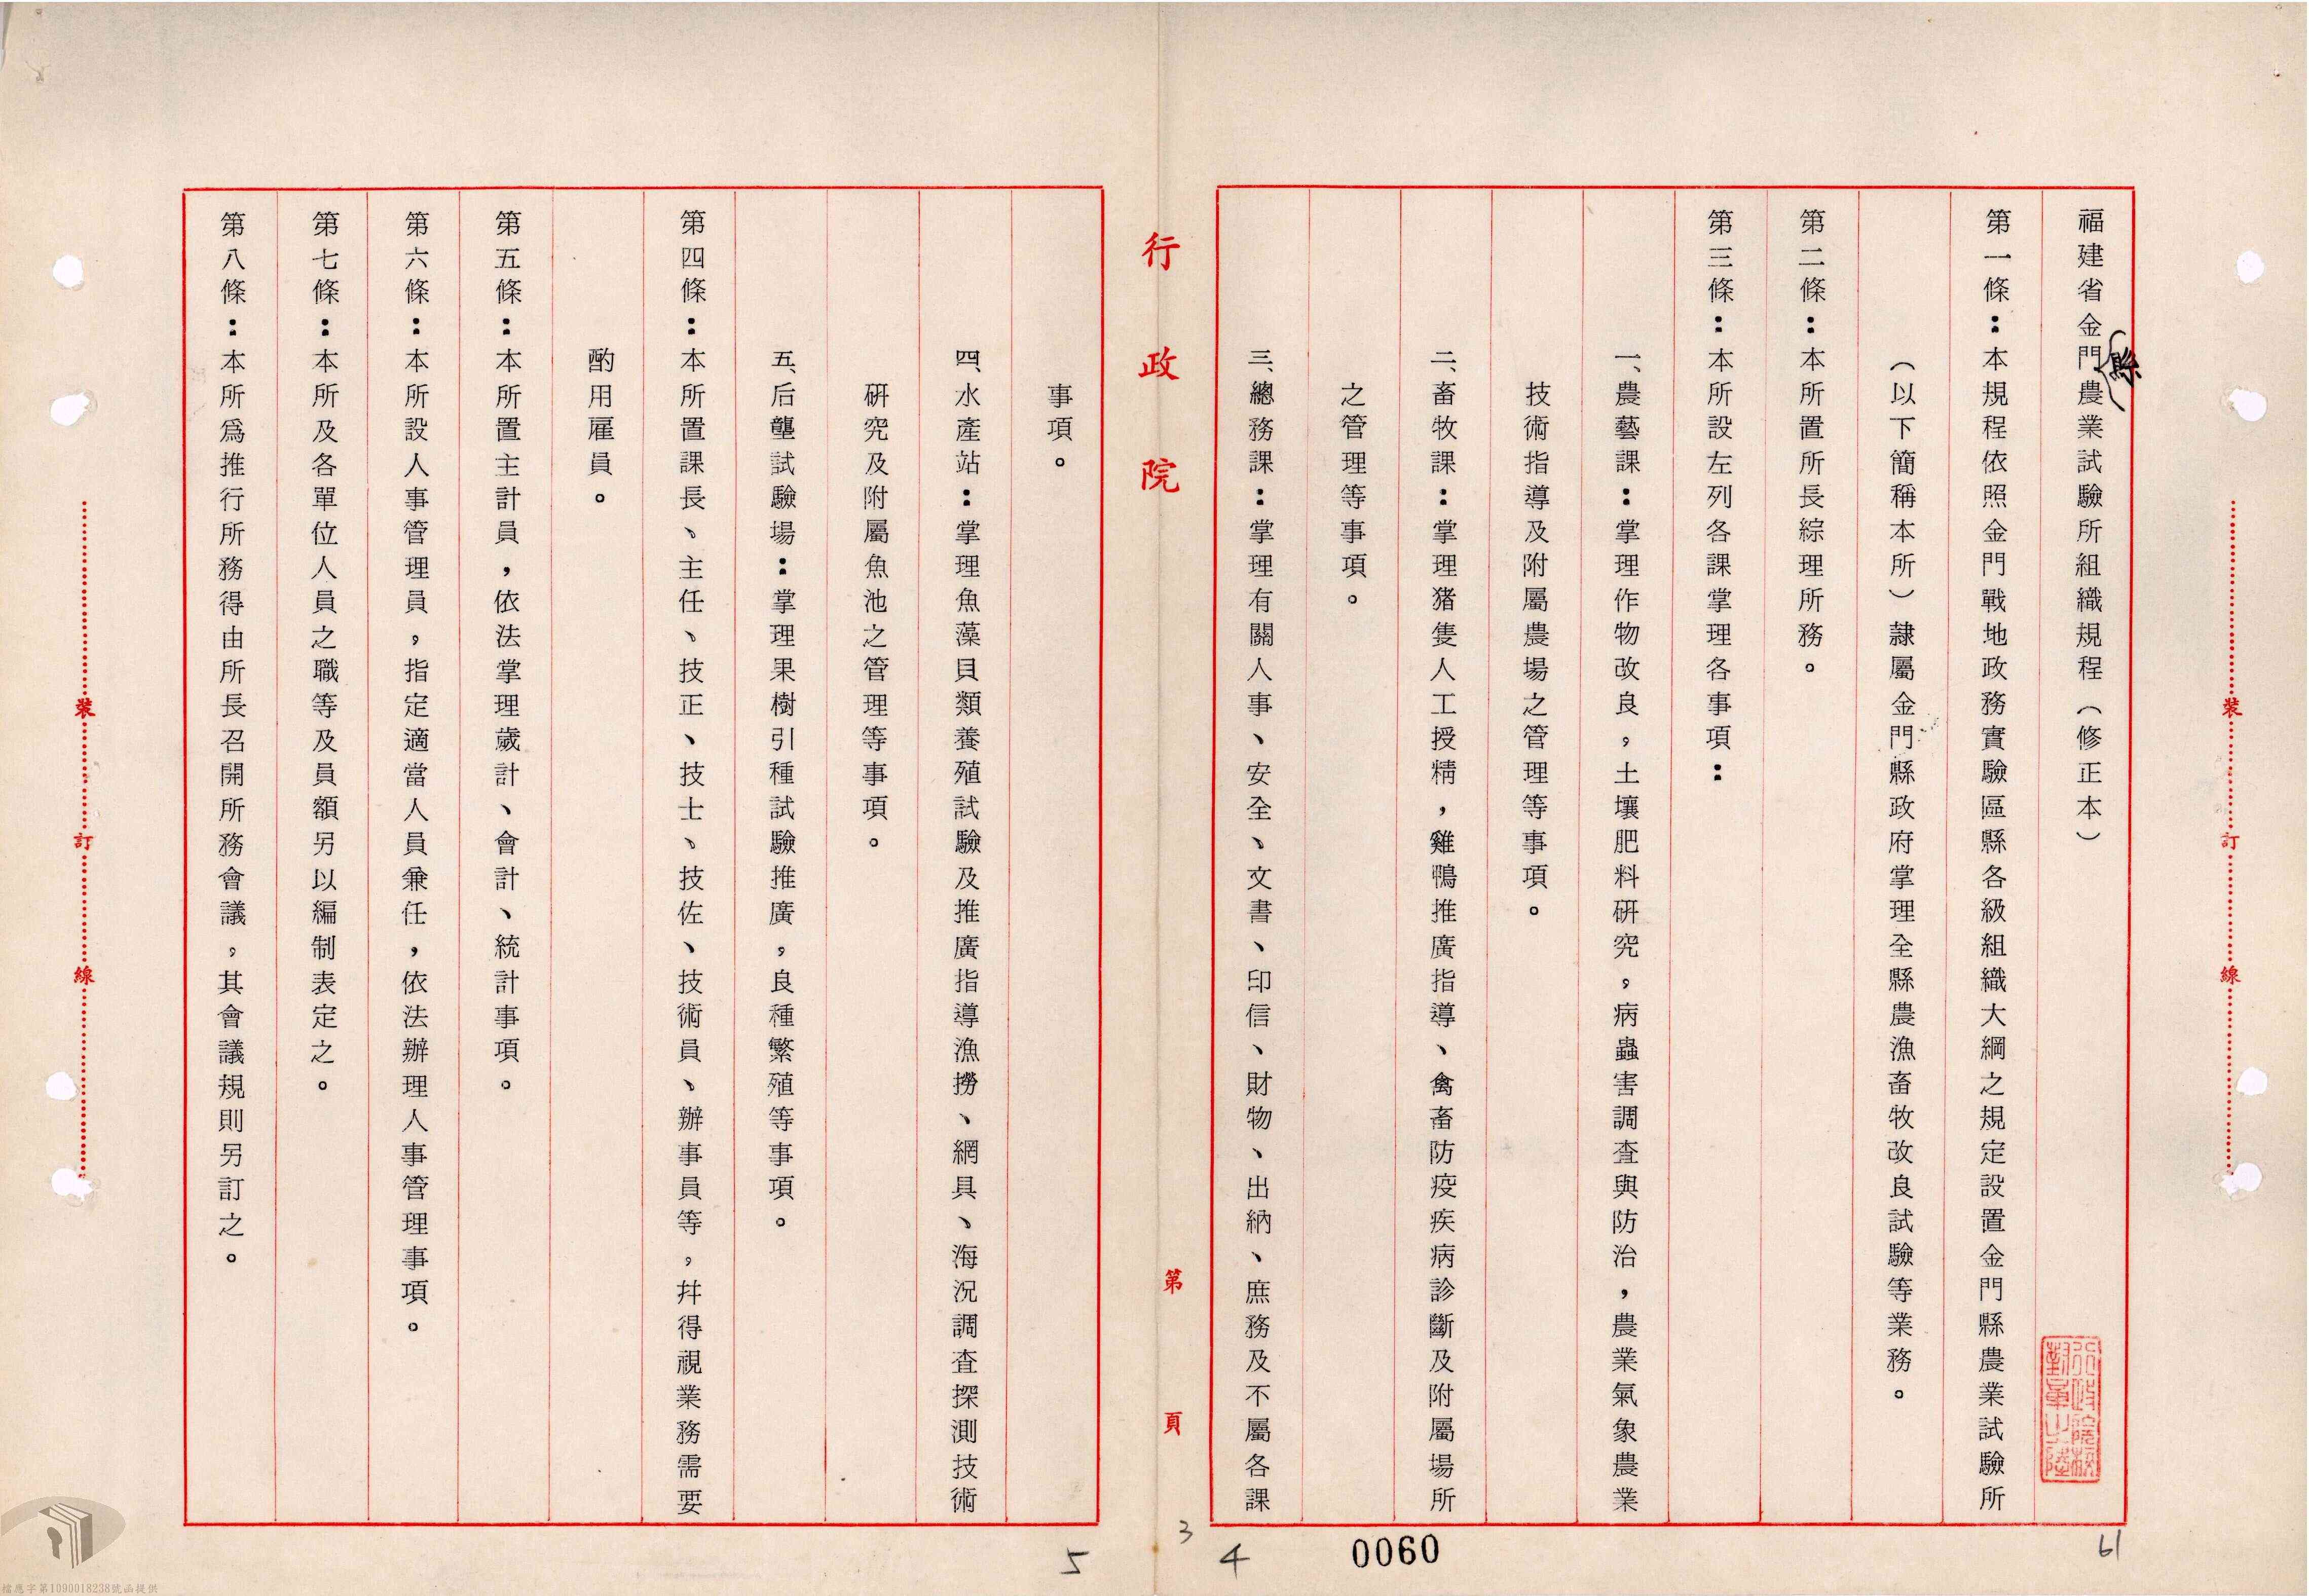 August 1972, Organizational Regulations of the Kinmen County Agricultural Research Institute during the period of military administration.